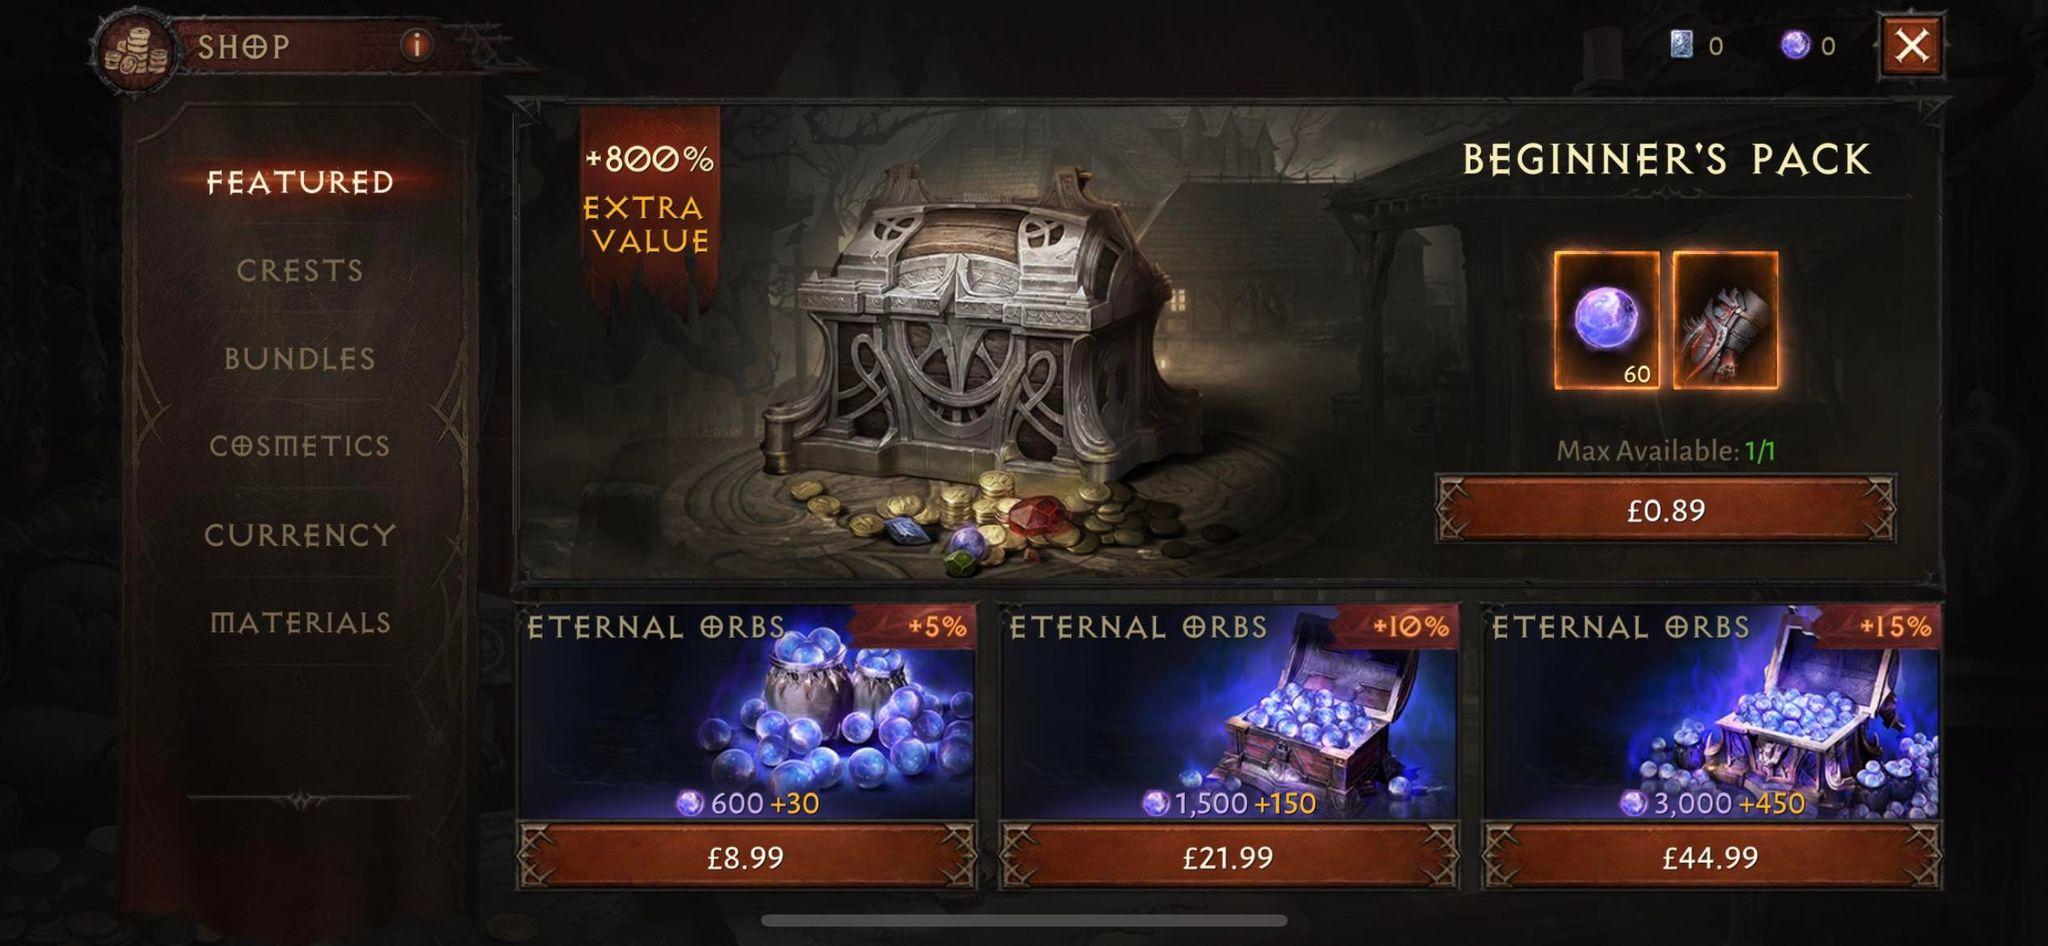 diablo immortal store with microtransactions for beginner chest and eternal orbs